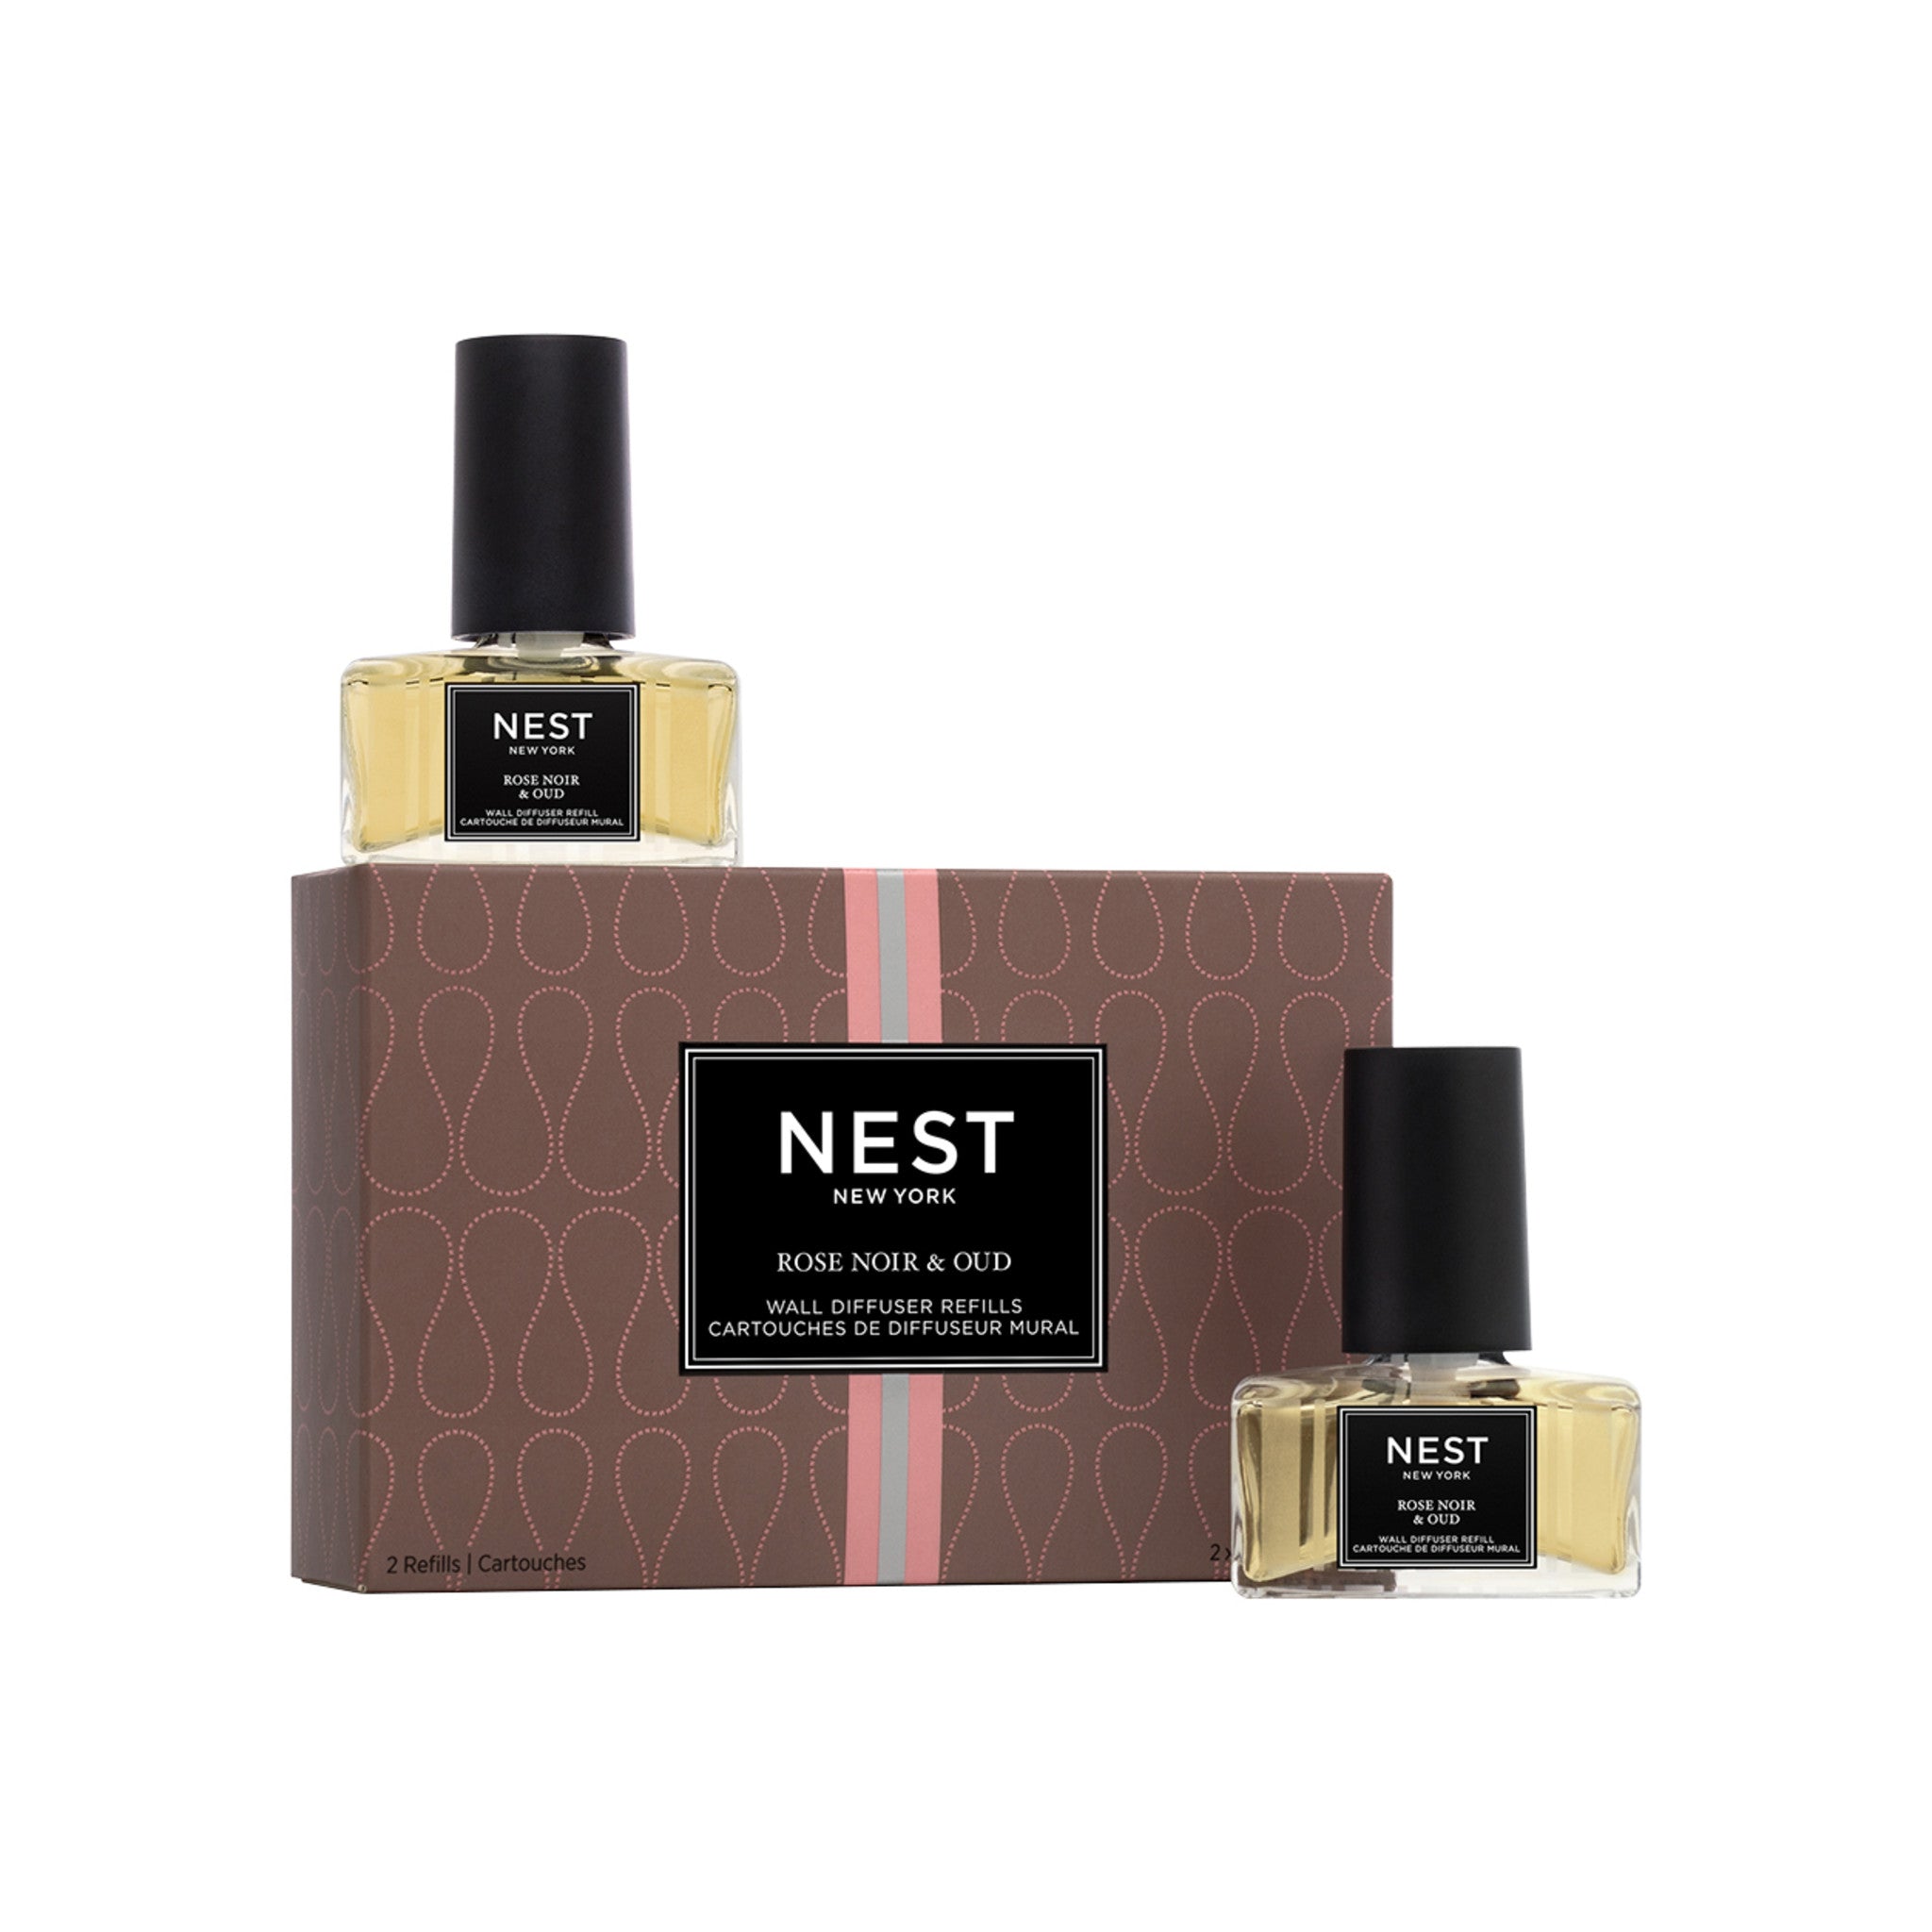 Nest Rose Noir and Oud Wall Diffuser Refill main image.